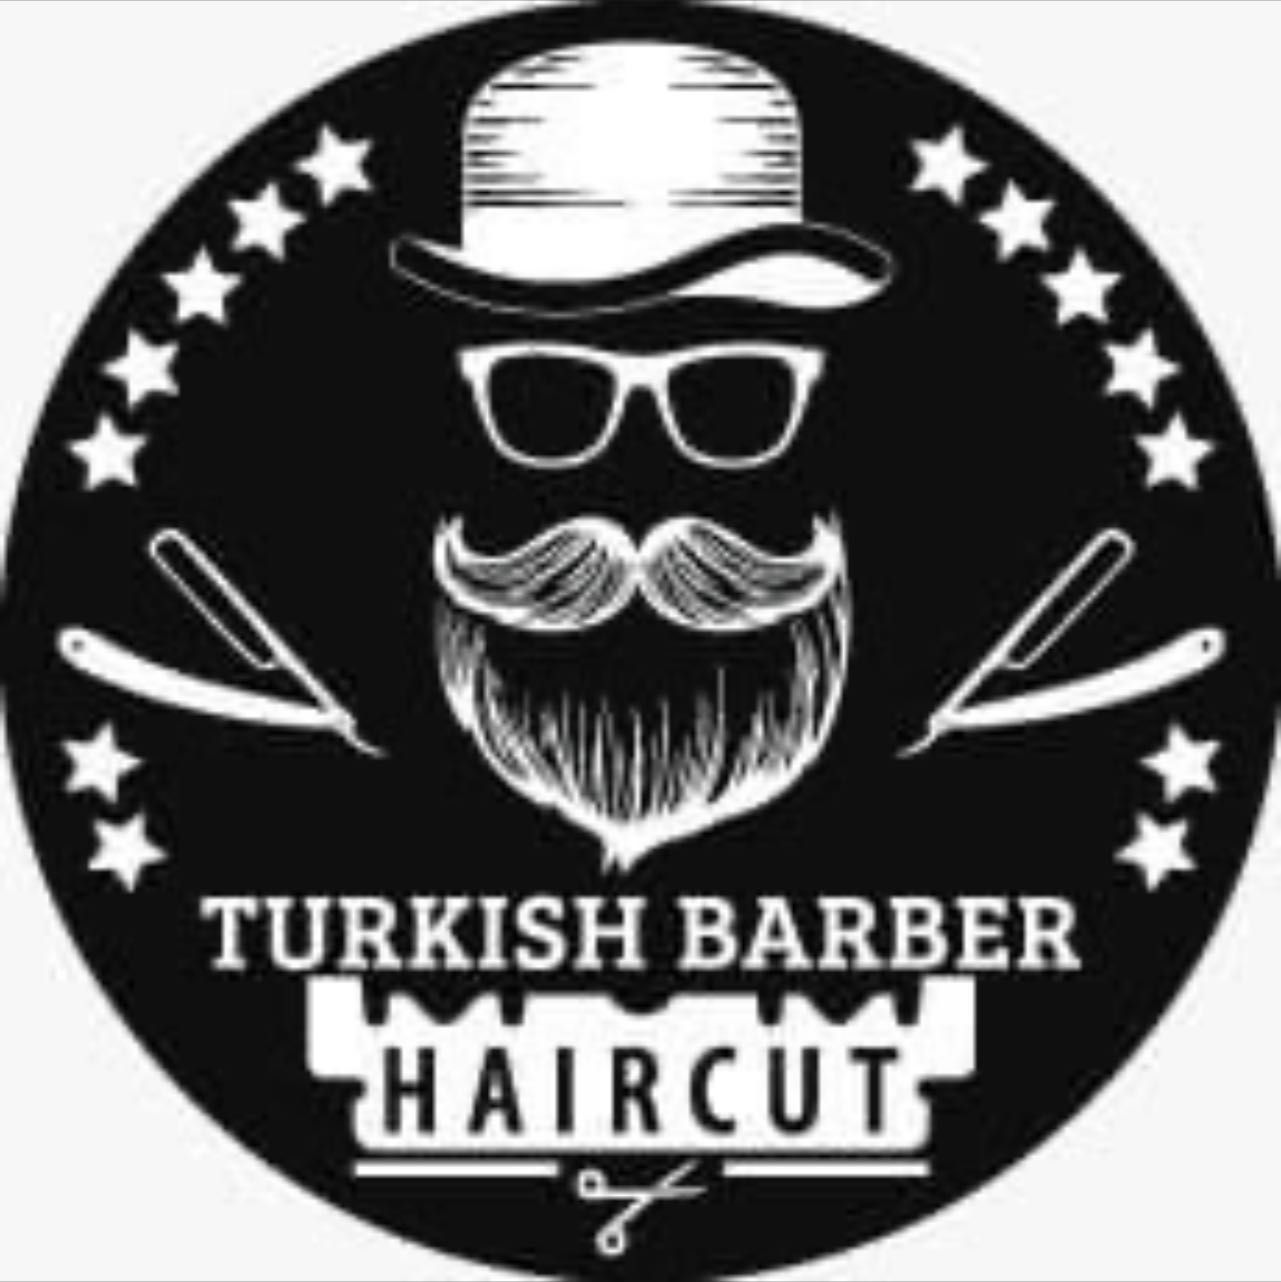 Fab barber, 11 St James's Square, M2 6DN, Manchester